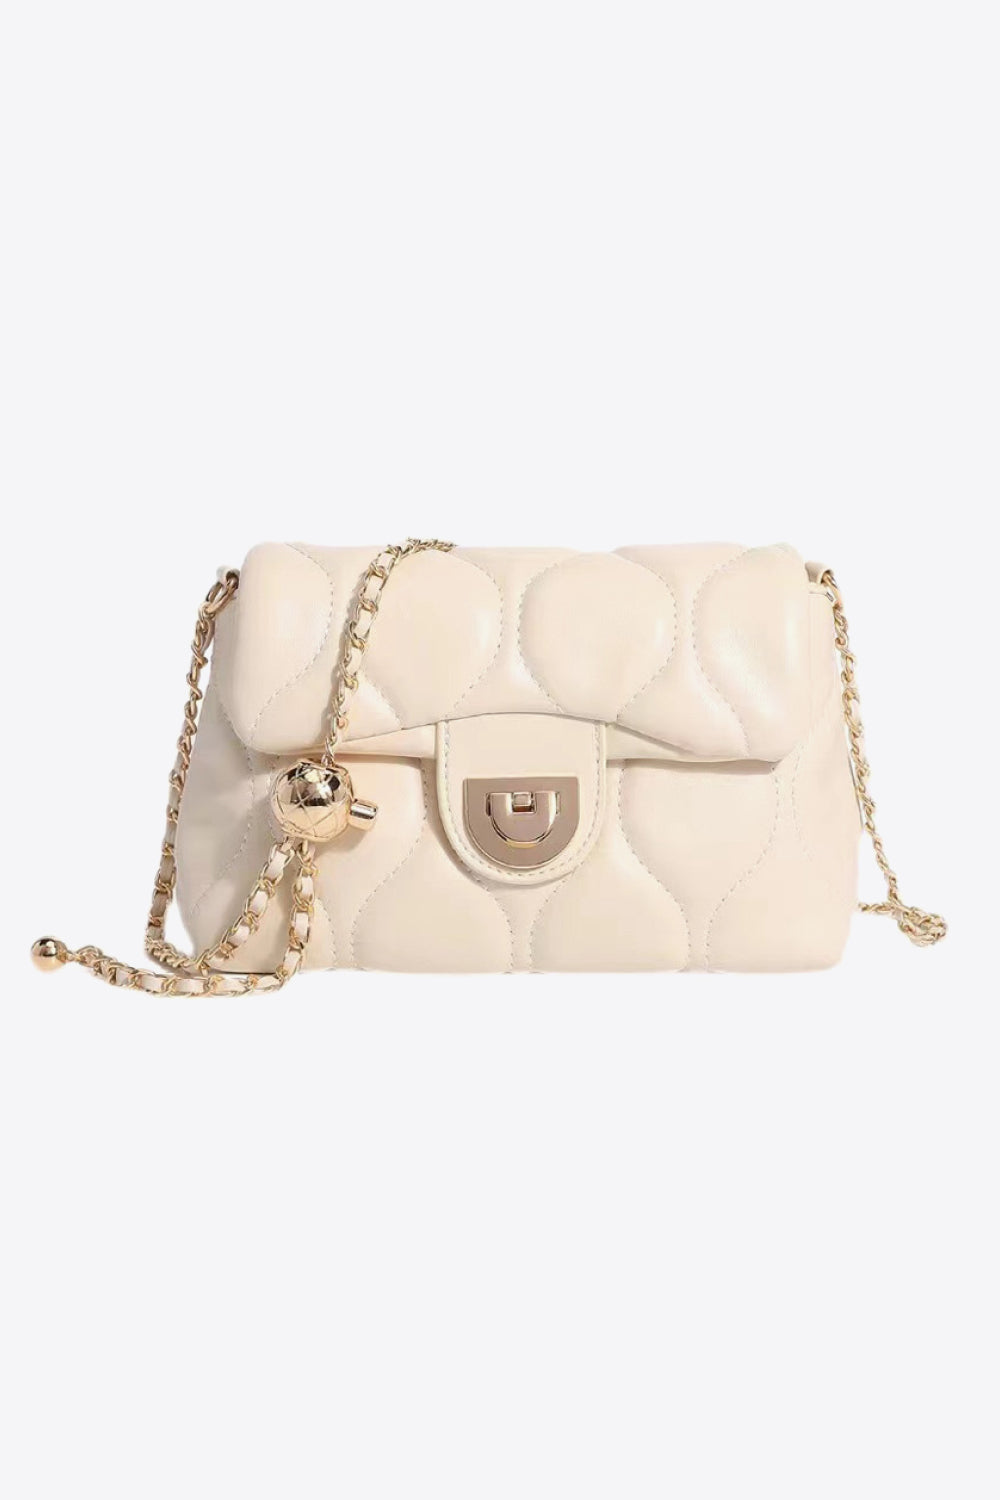 PU Leather Adjustable Chain Crossbody Bag Ivory One Size